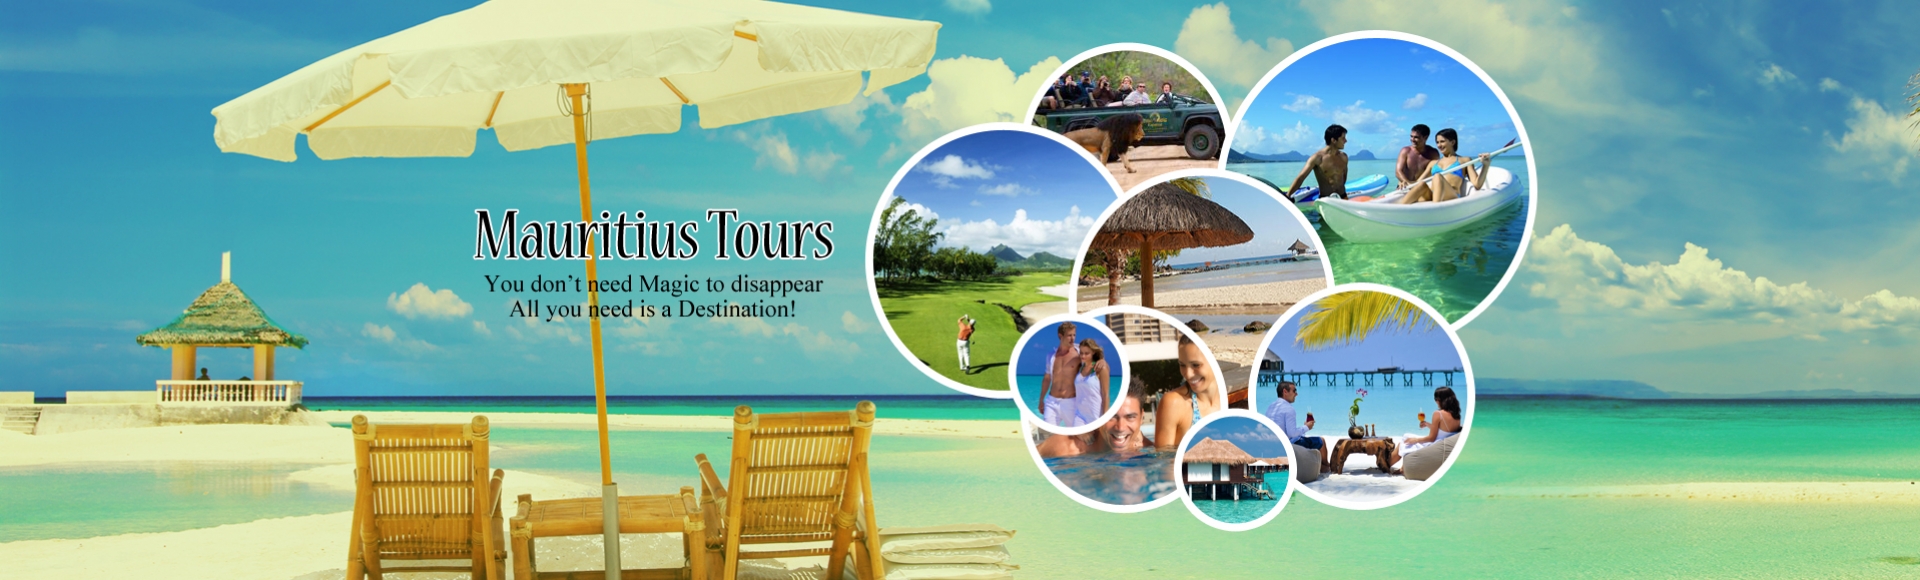 Mauritius for Vacation Tour